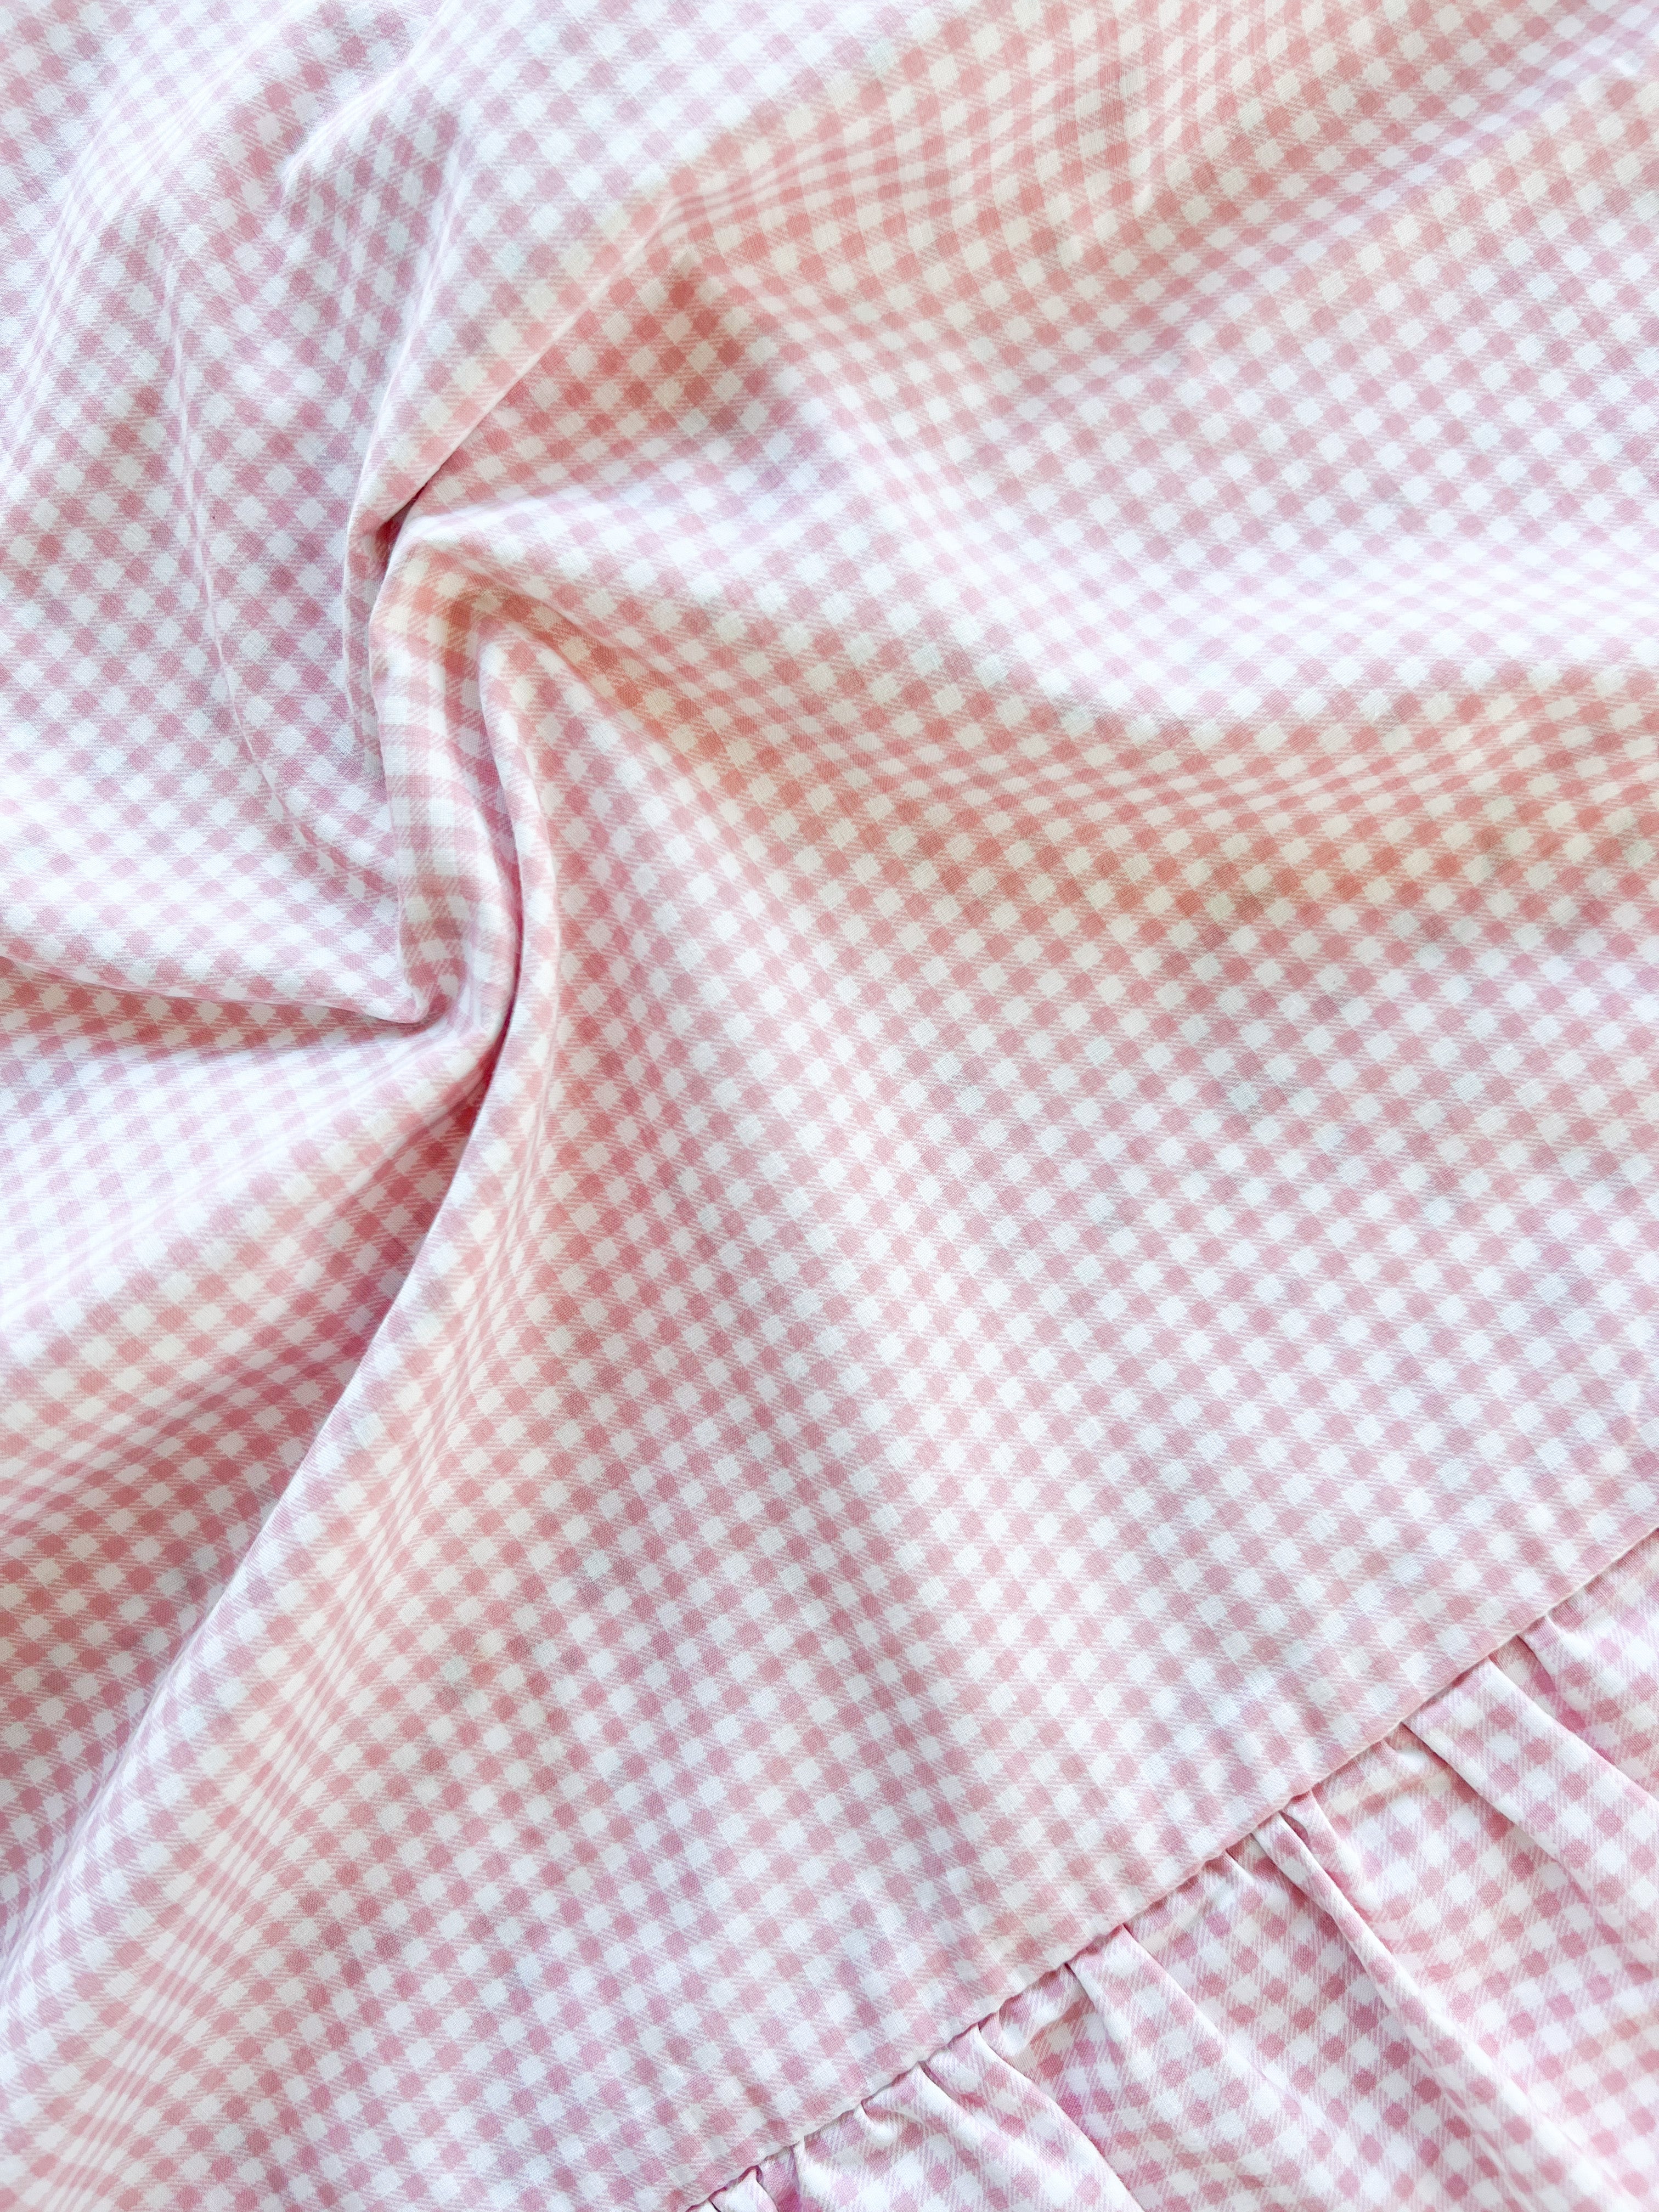 PERFECT PINK GINGHAM